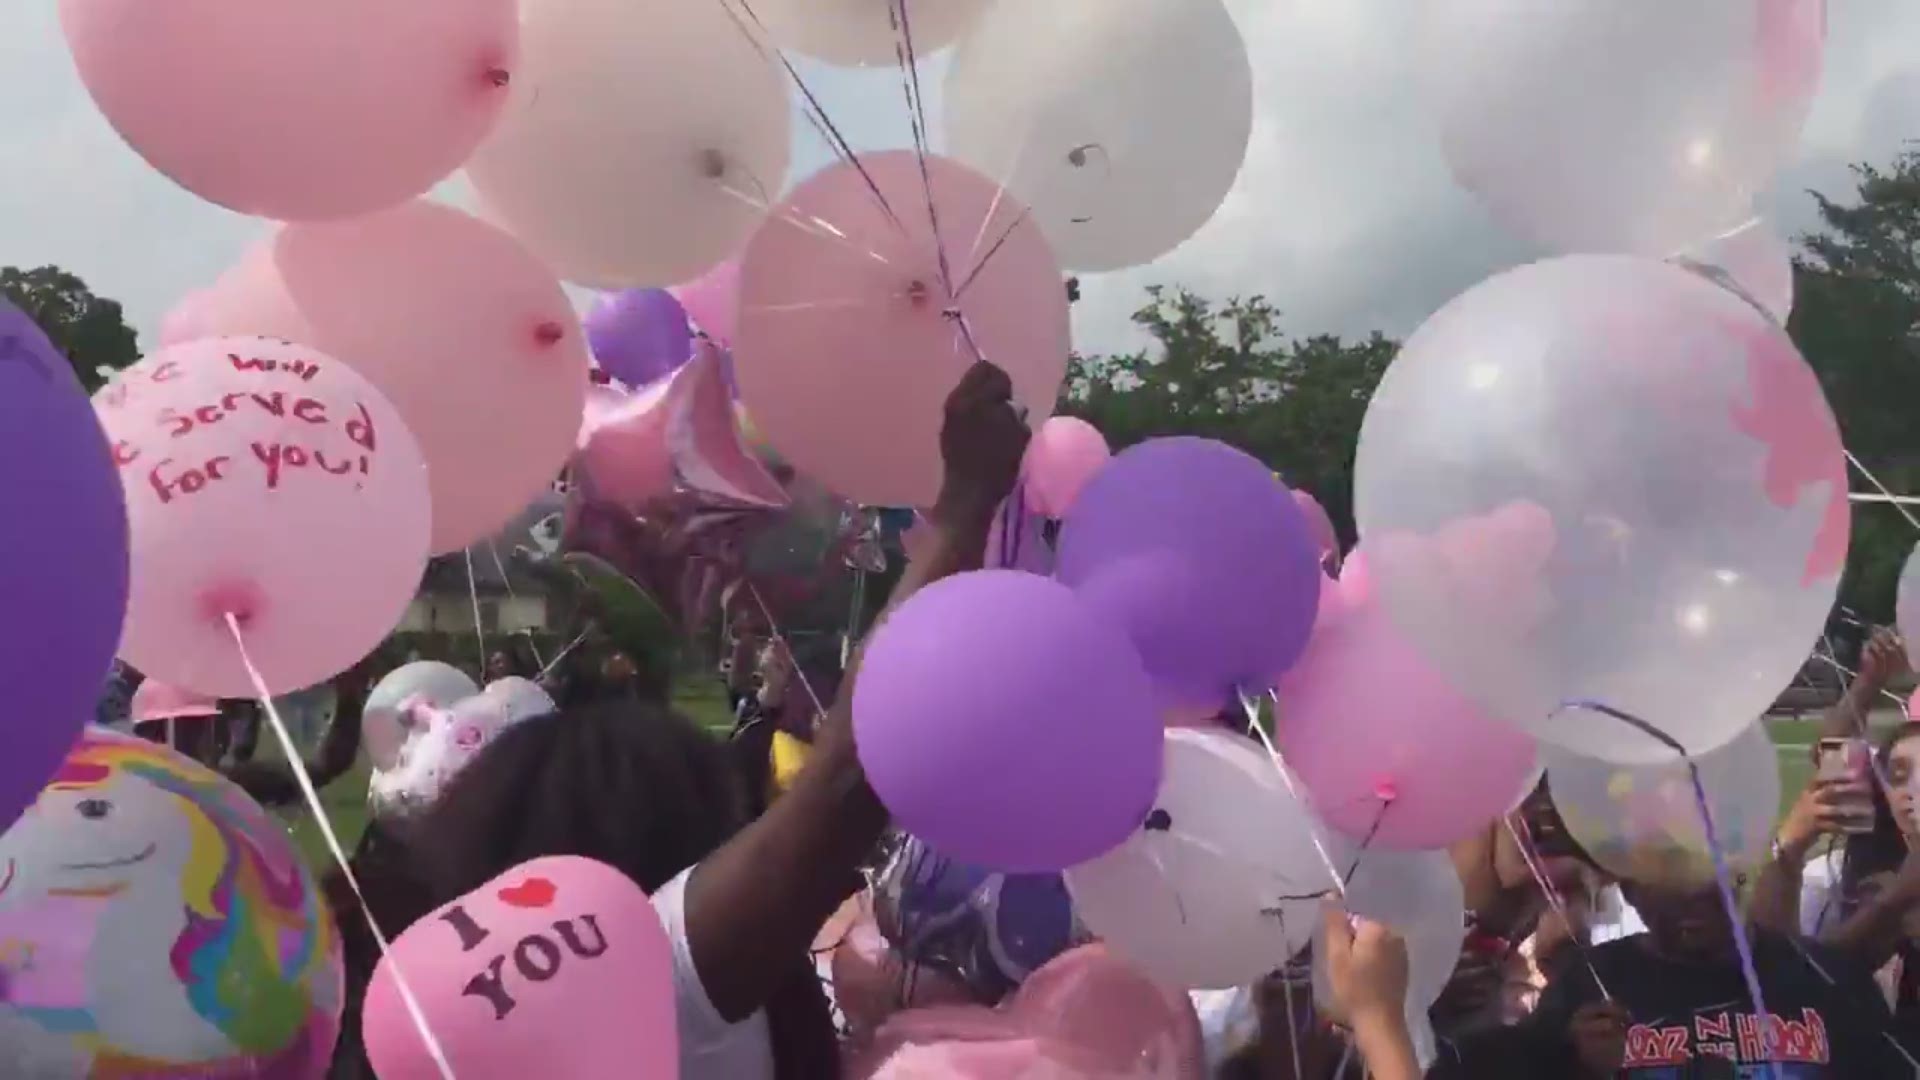 Two weeks since an Amber Alert was issued for 4-year-old Maleah Davis, the community came together for another vigil and balloon release for the little girl that remains missing.